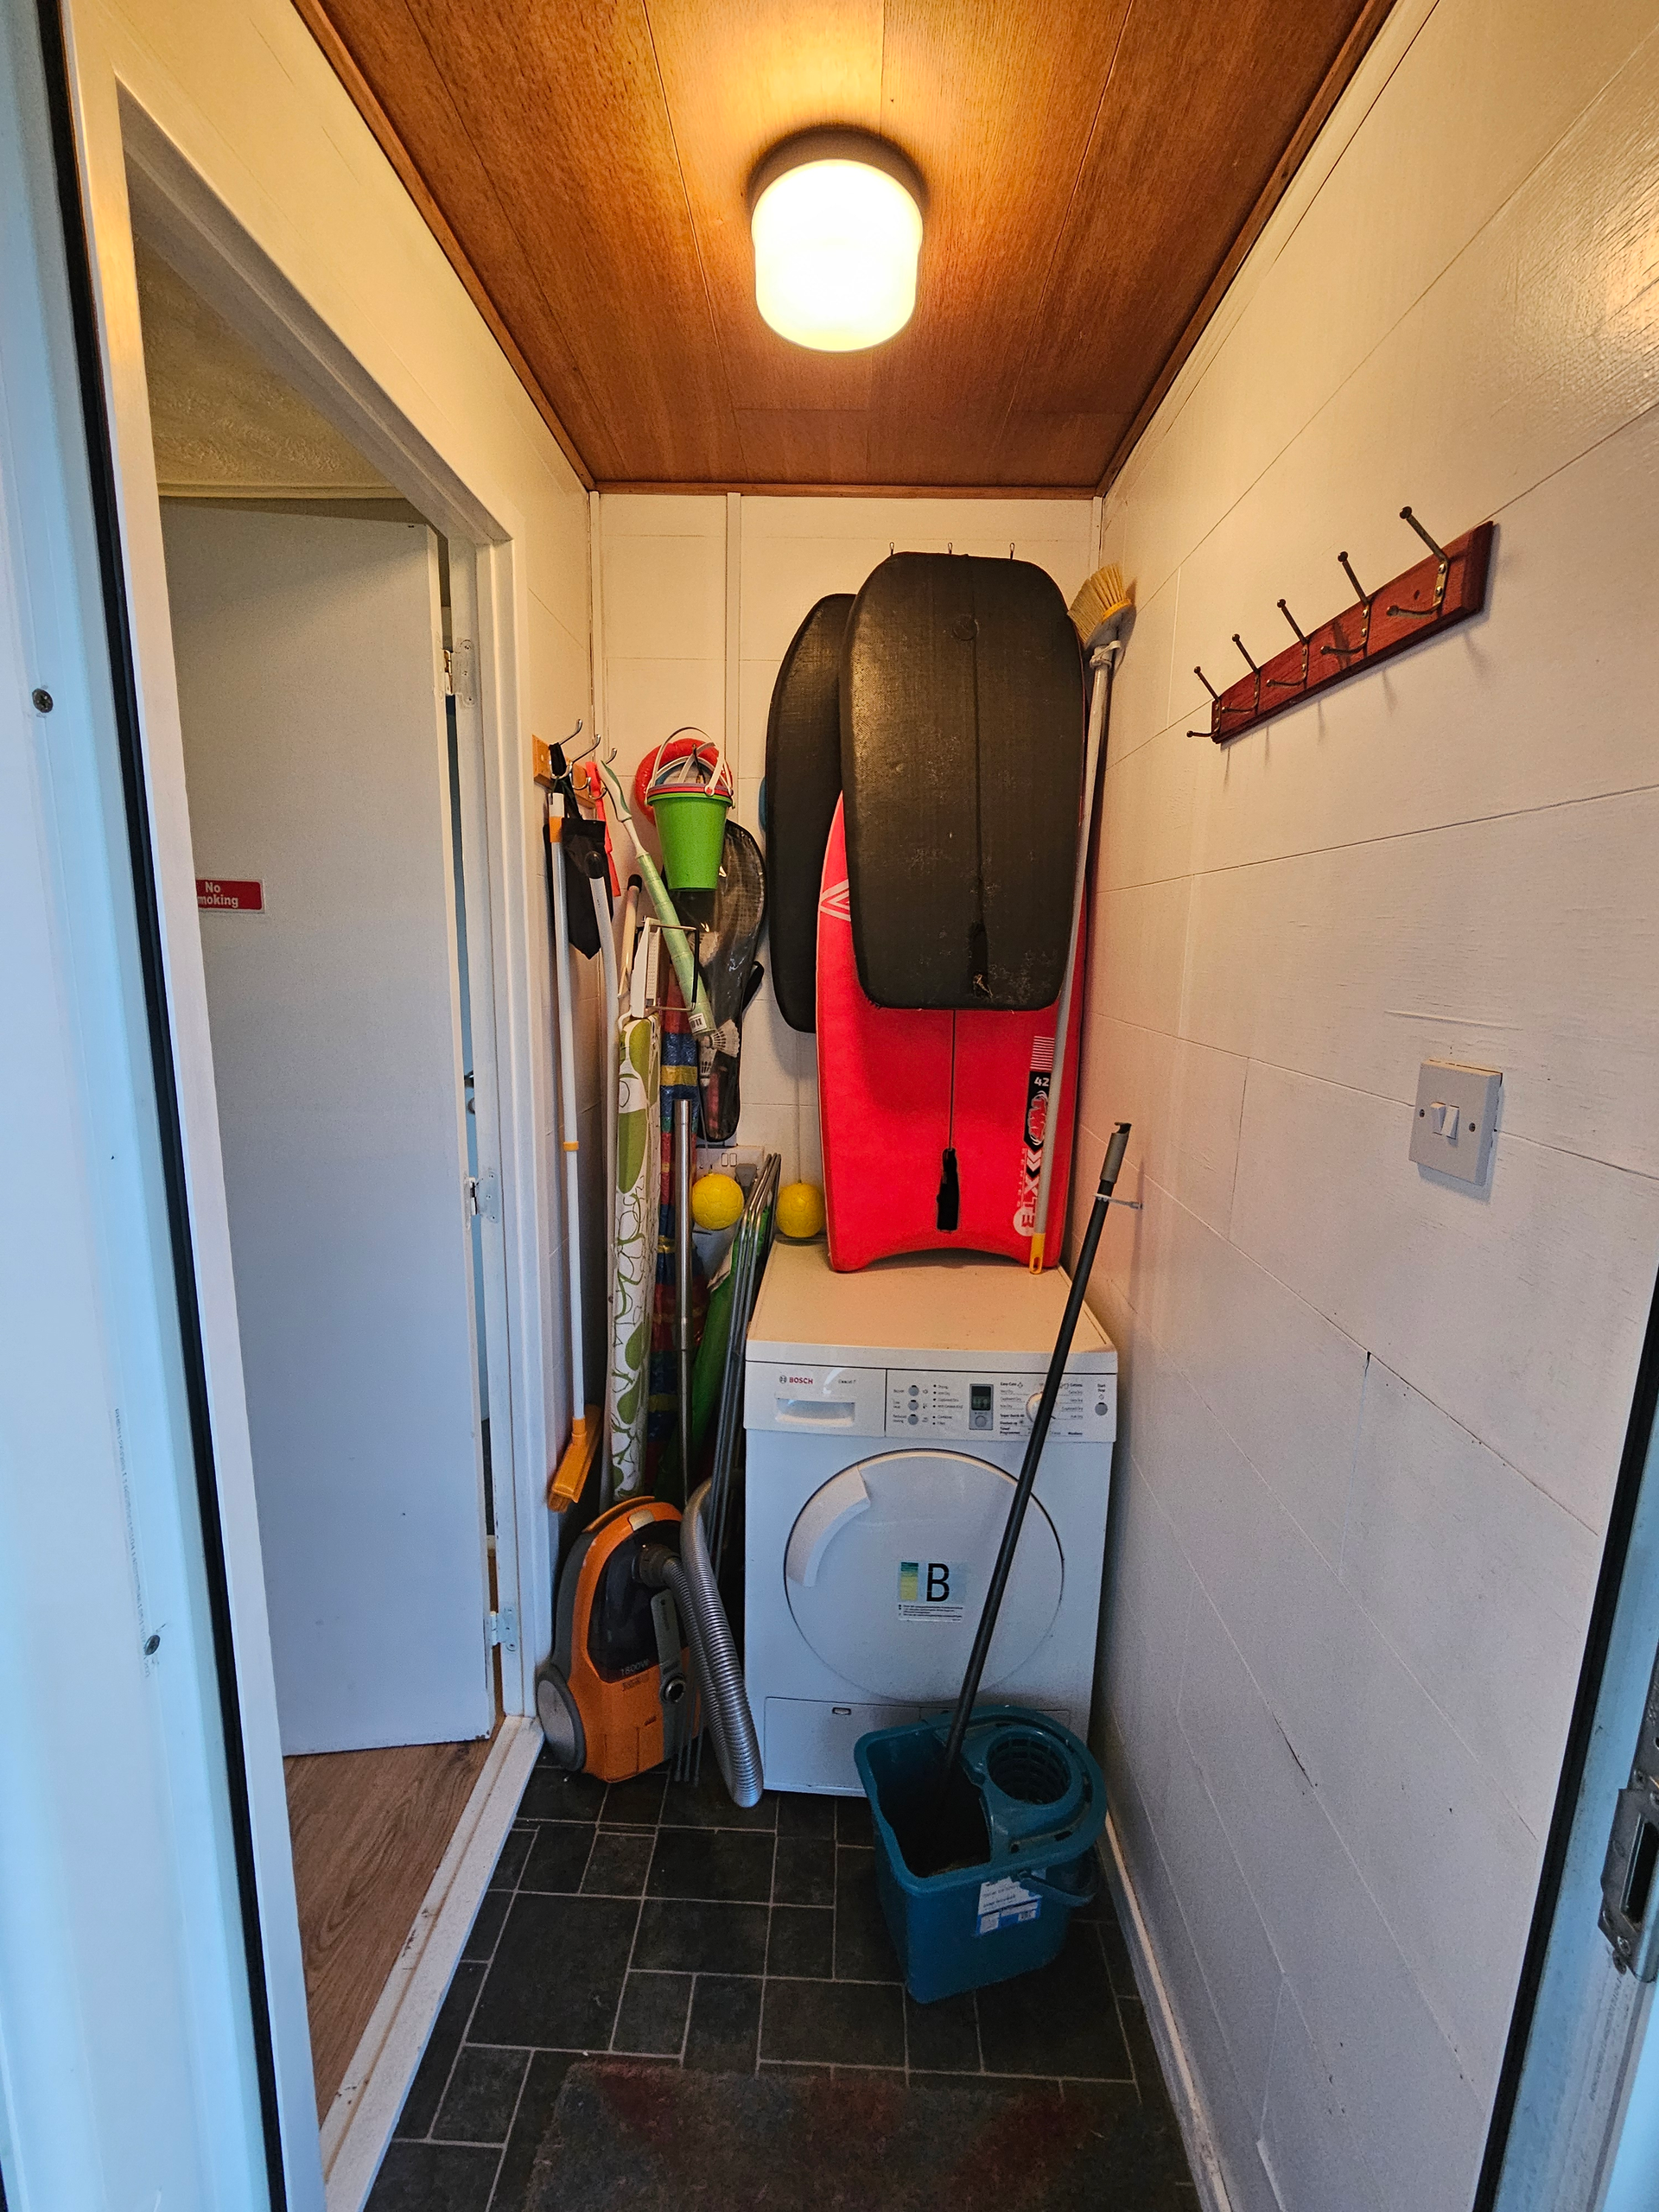 One of the entrances to the lodge, which has a few beach boards, buckets/spades, rackets, all you would need for the beach. Also has a tumble dryer and clothes horse